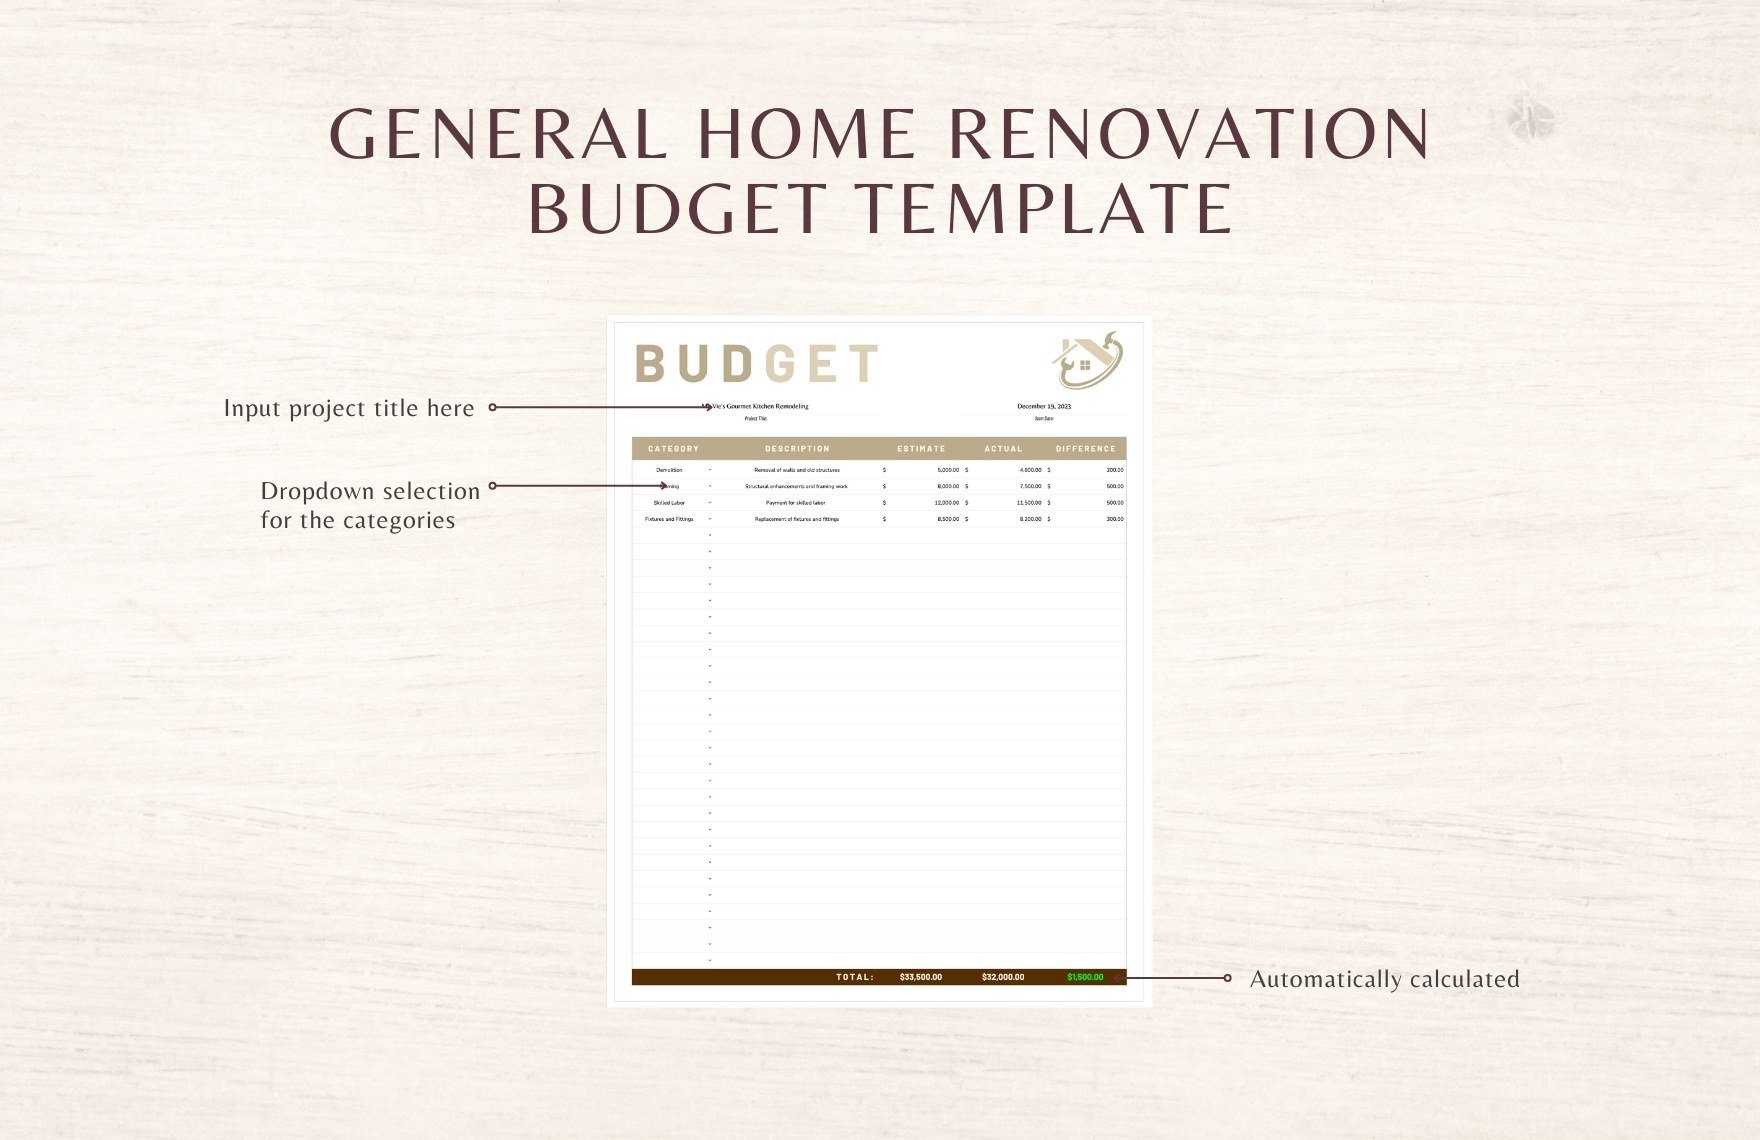 General Home Renovation Budget Template